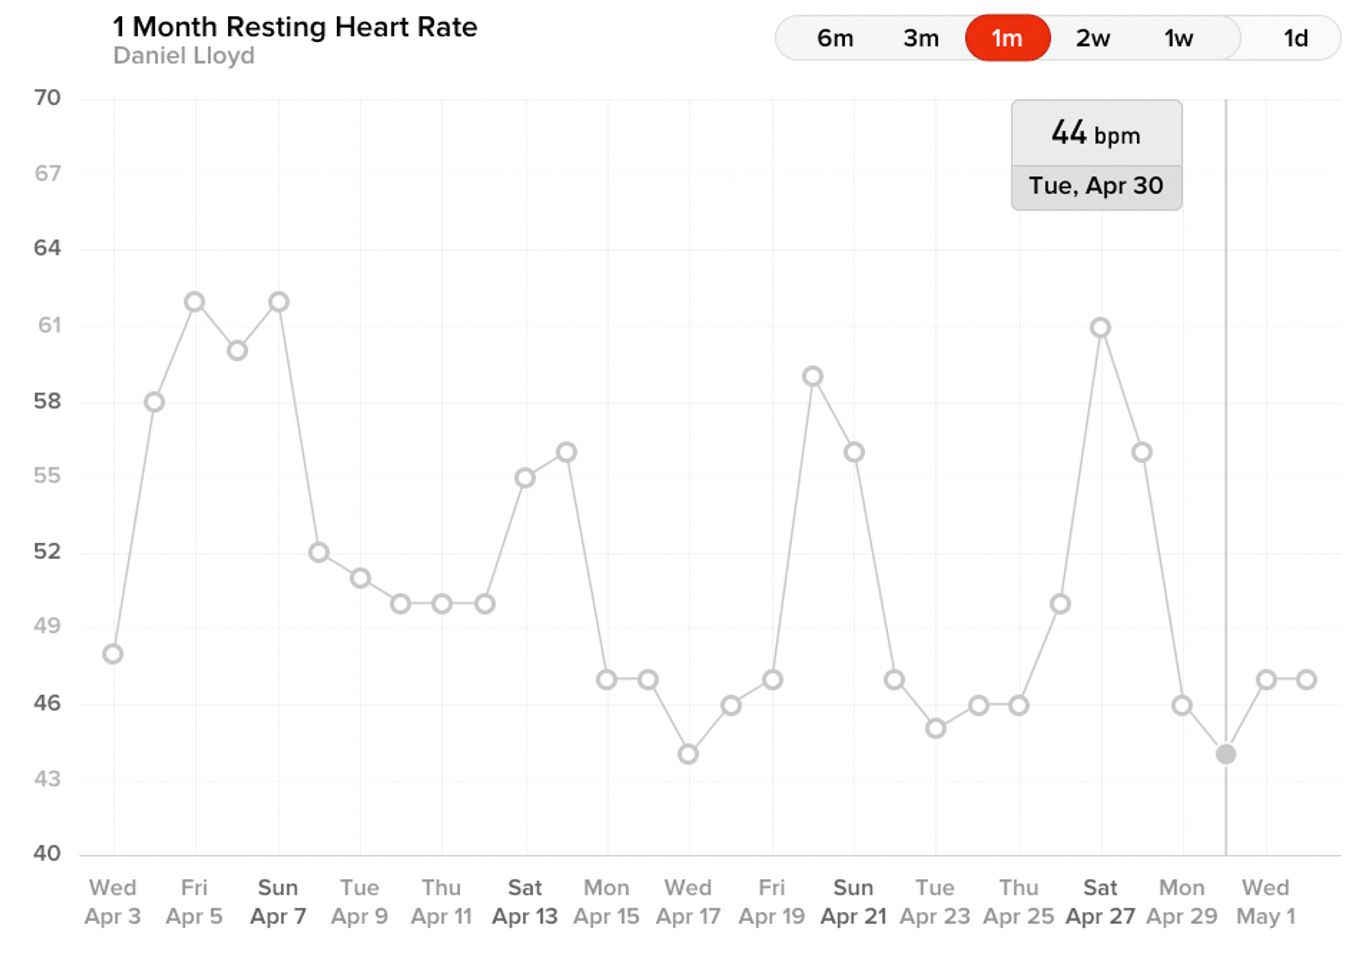 There is already visible changes to both HRV and resting heart rate